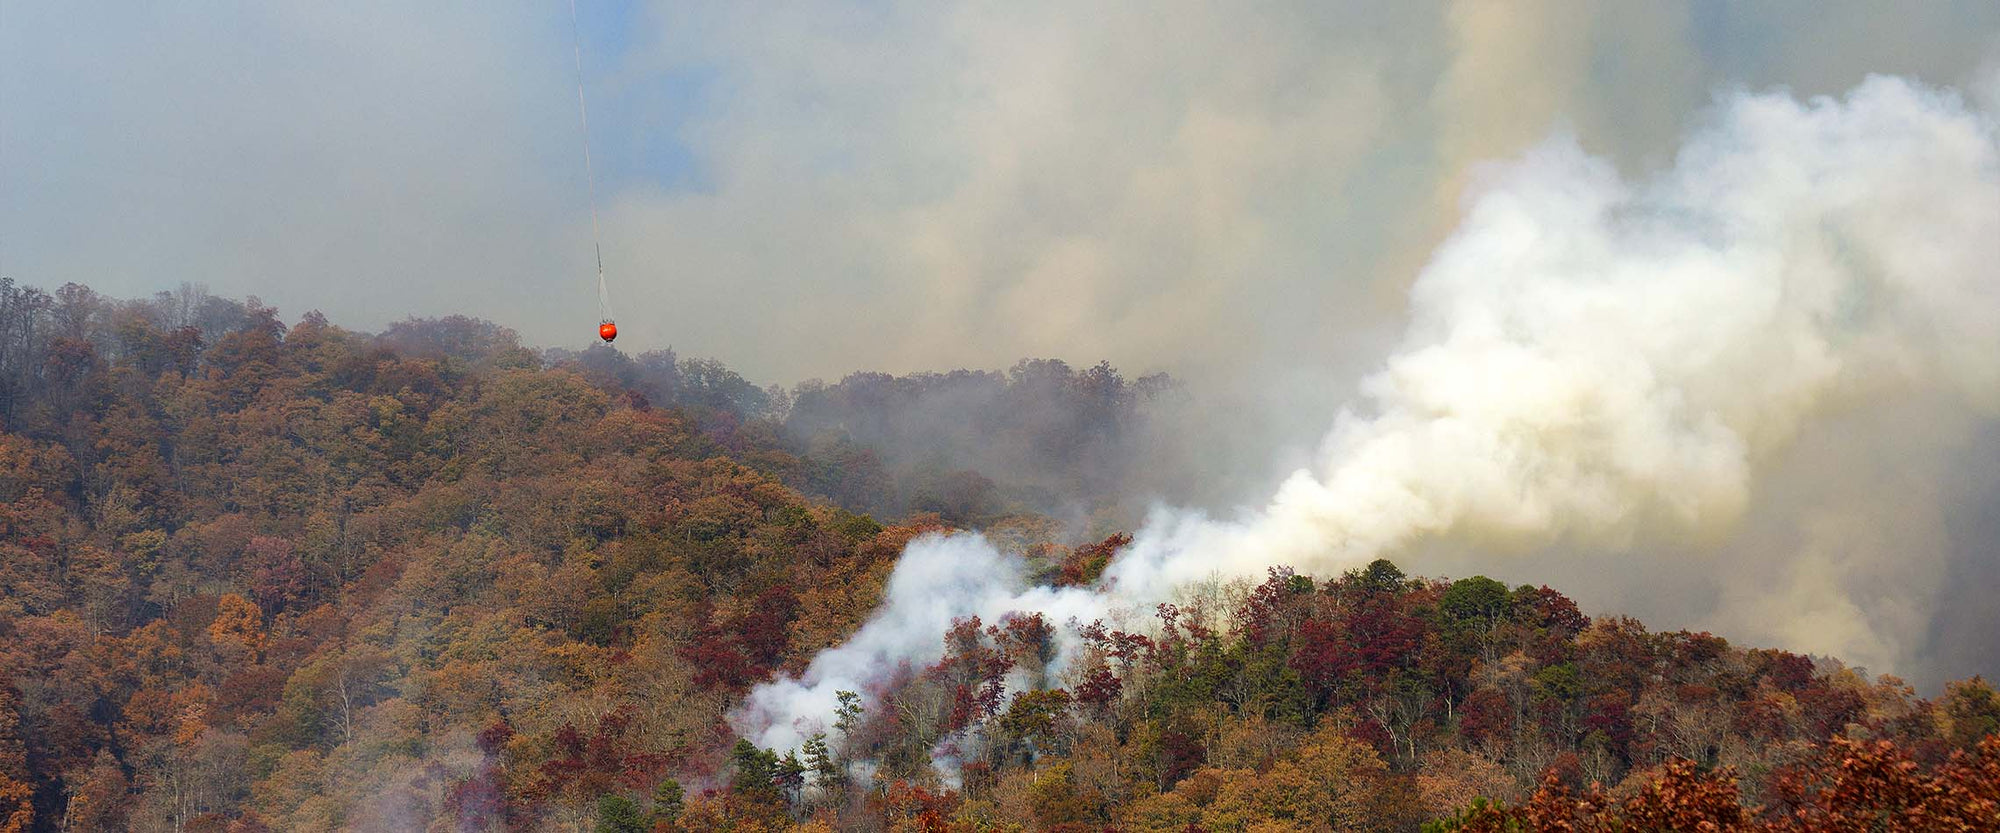 Fire burning in the mountains of North Carolina.